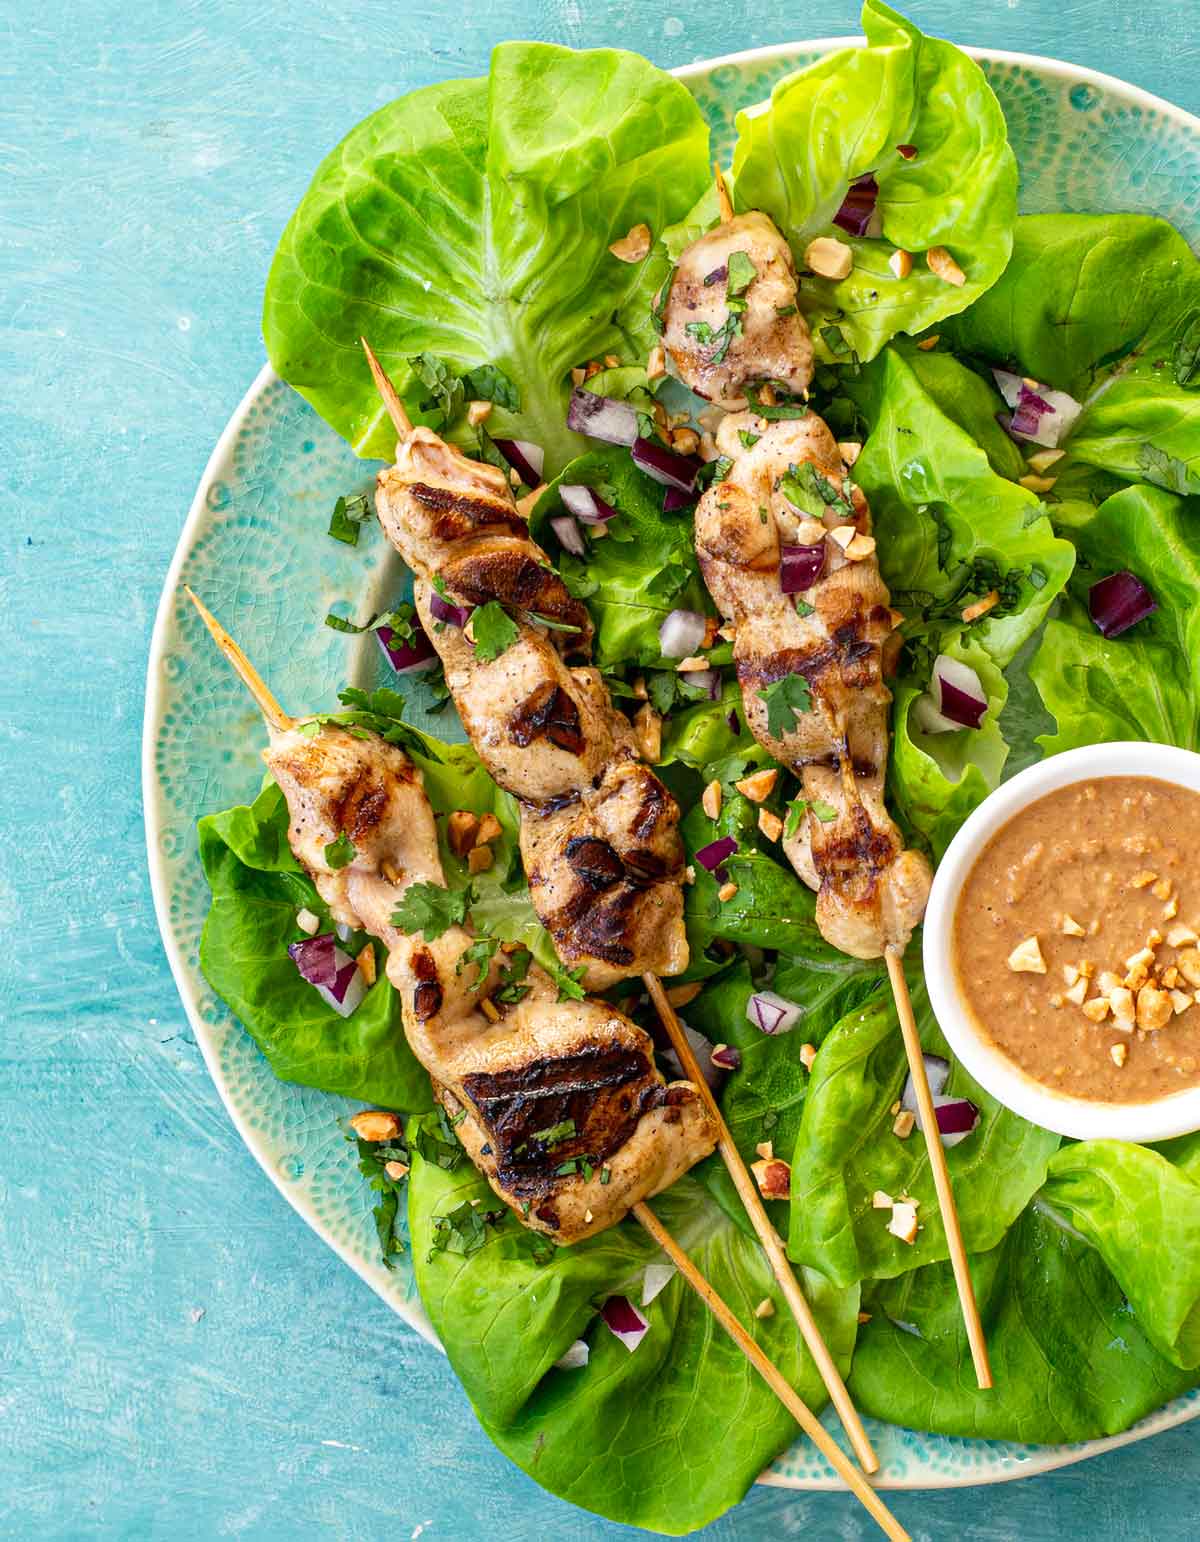 Citrus soy chicken skewers on a plate of lettuce, with a bowl of peanut dipping sauce.